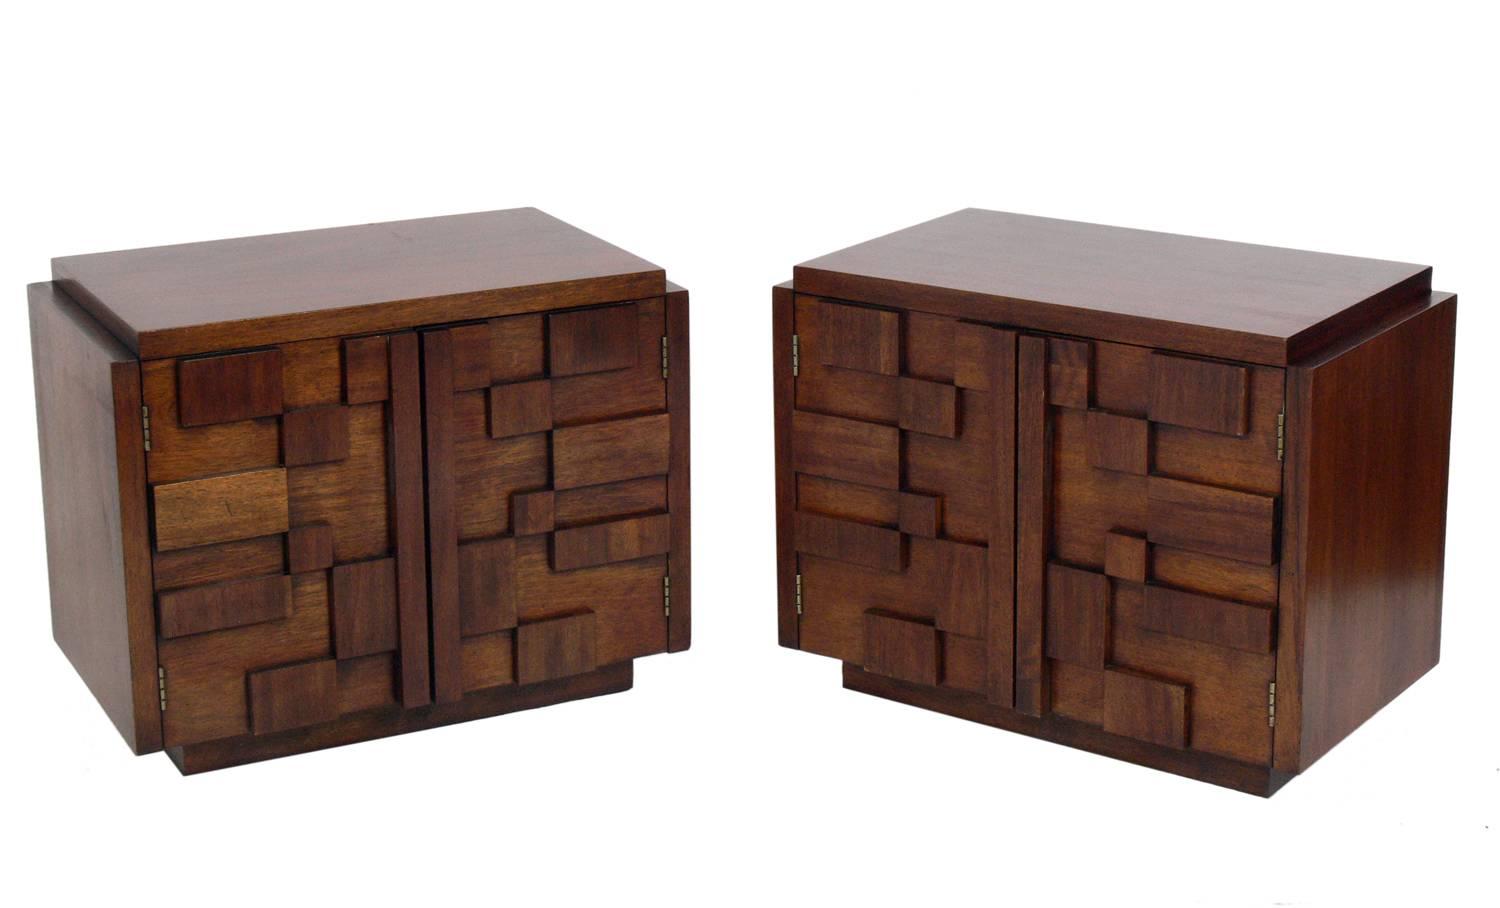 Pair of sculptural Brutalist walnut nightstands or end tables, in the manner of Paul Evans, Louise Nevelson, et al, by Lane, circa 1960s. They are a versatile size and can be used as nightstands, end or side tables. They retain their original finish.